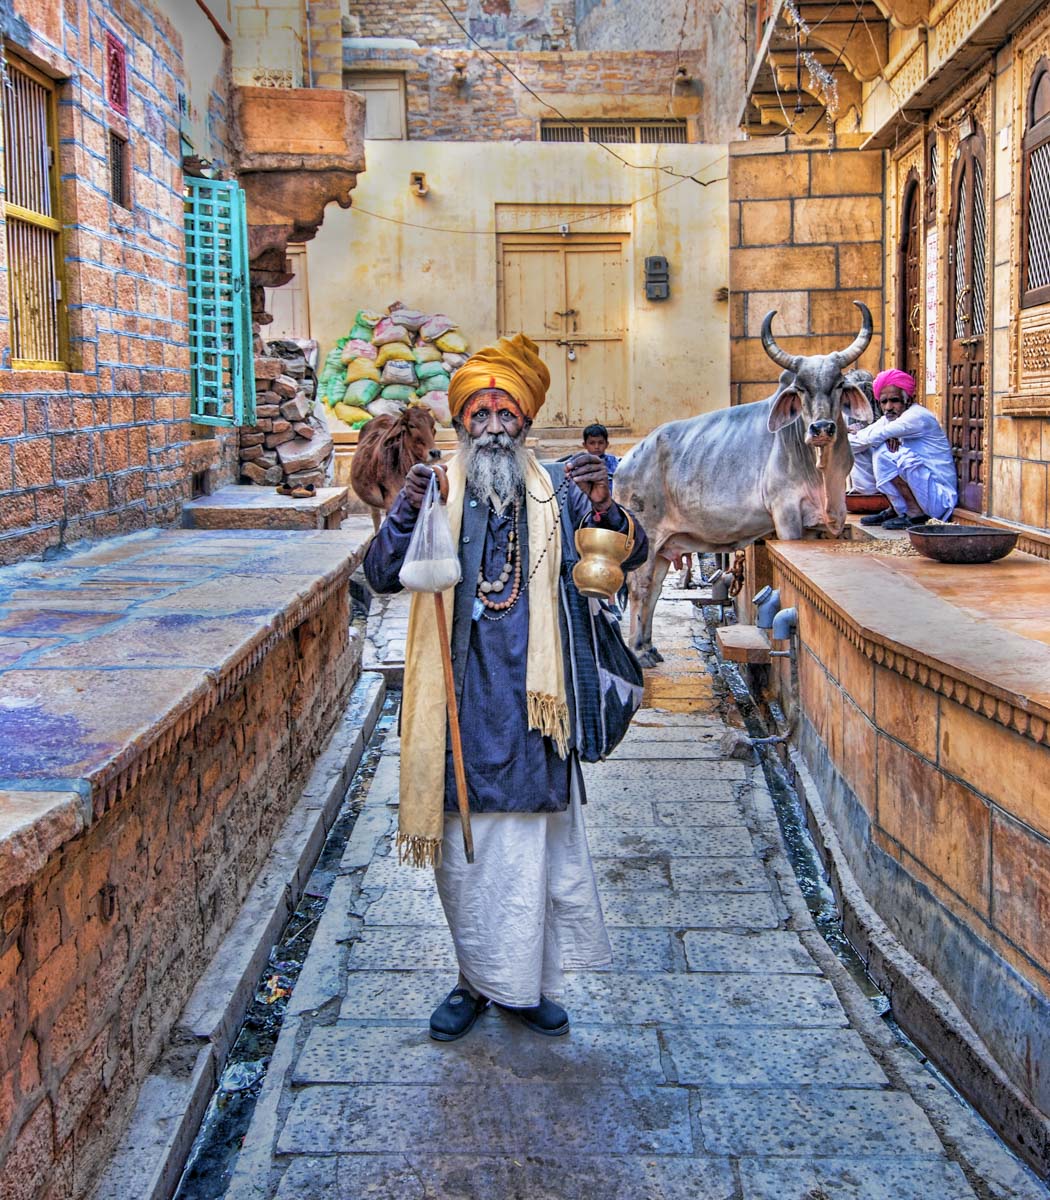 This baba on the streets of Jaisalmer is happy to pose for a photo in exchange for a few rupees